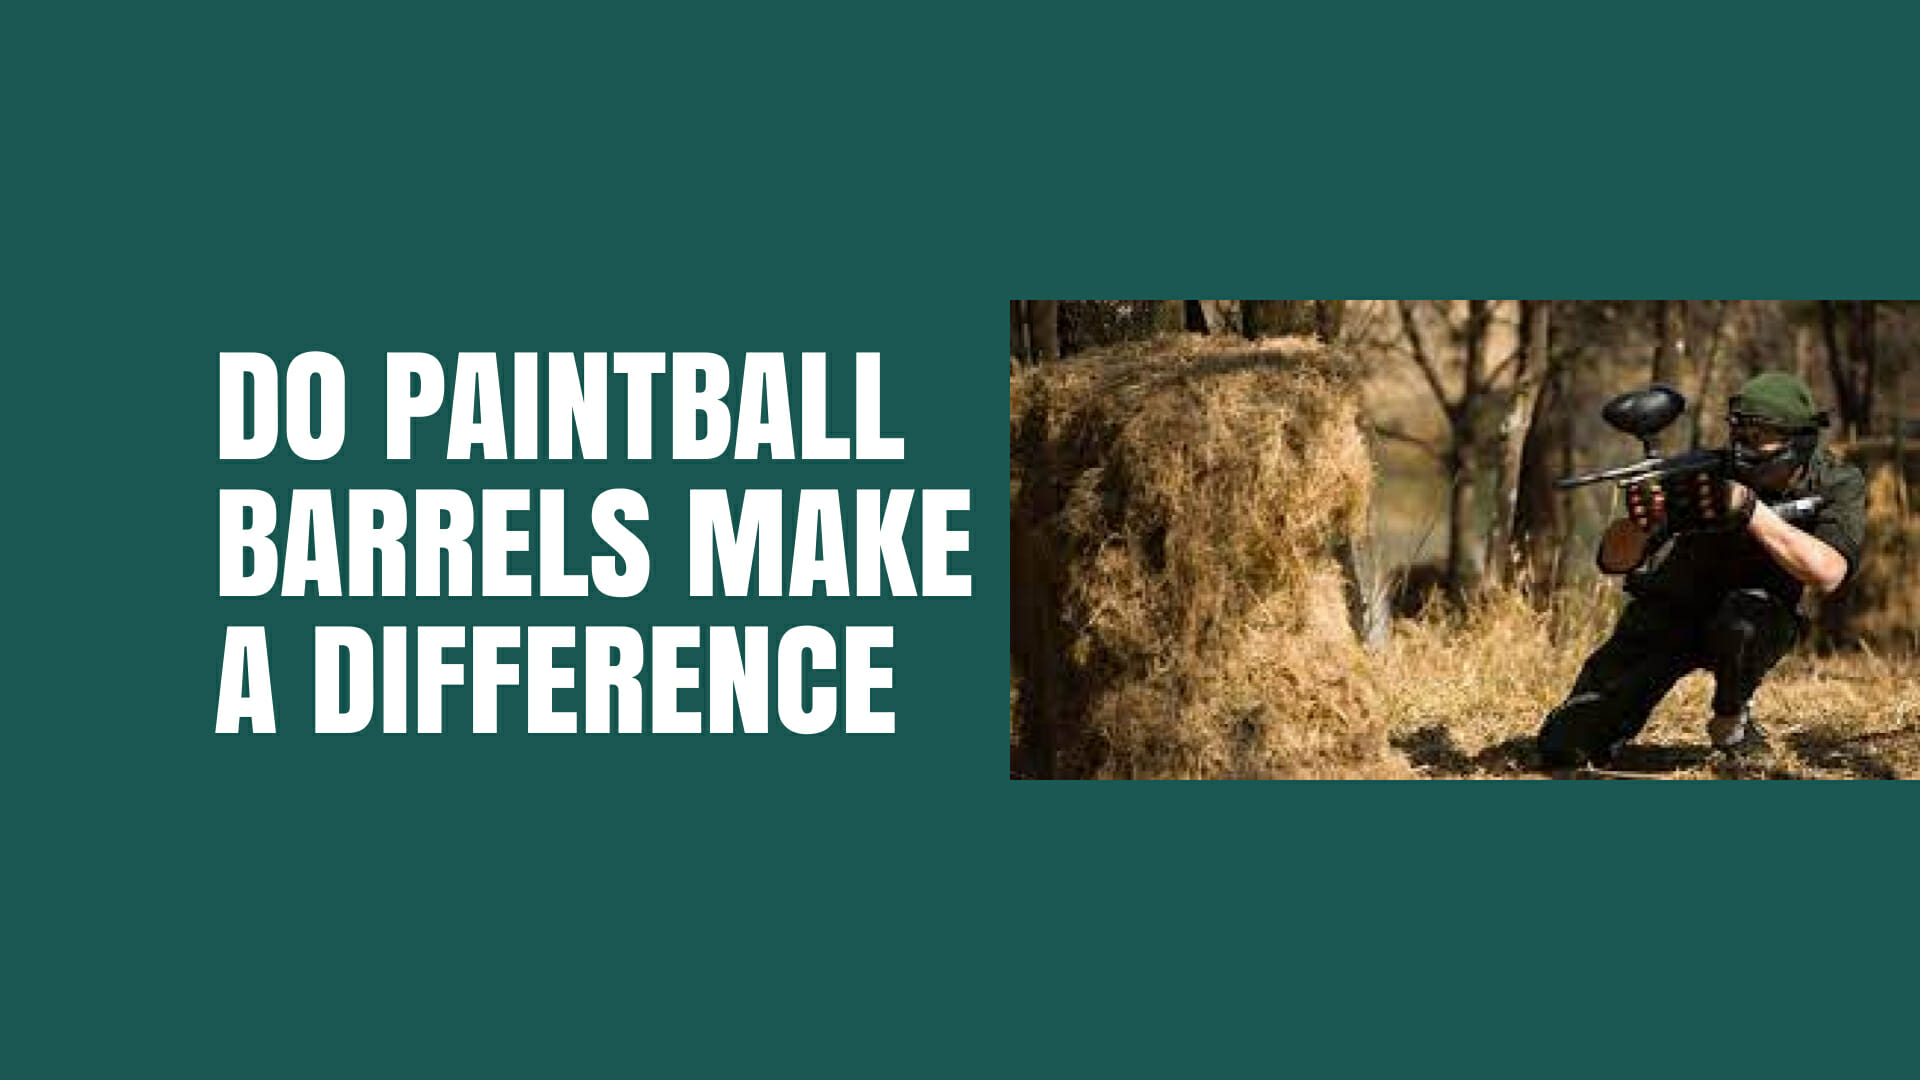 Do Paintball Barrels Make a Difference